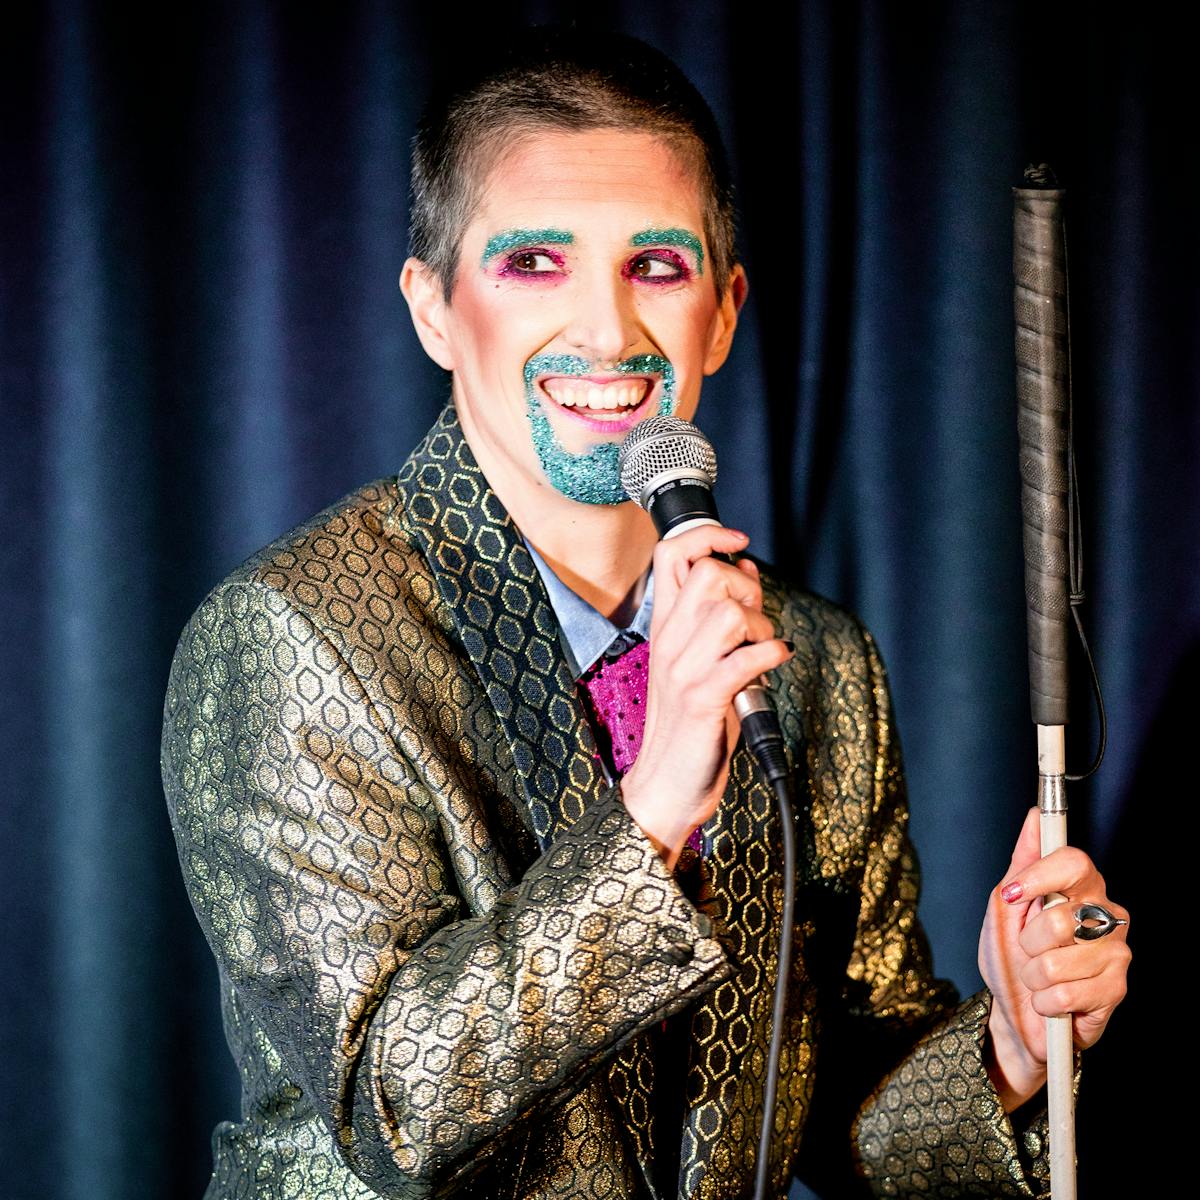 Photograph showing a performer on a stage in a small theatre. The performer is dressed in a shiny gold suit. Their right hand is holding a microphone to their mouth. In their left hand they are holding a white cane. Their mouth and eye brows are covered in blue glitter make-up